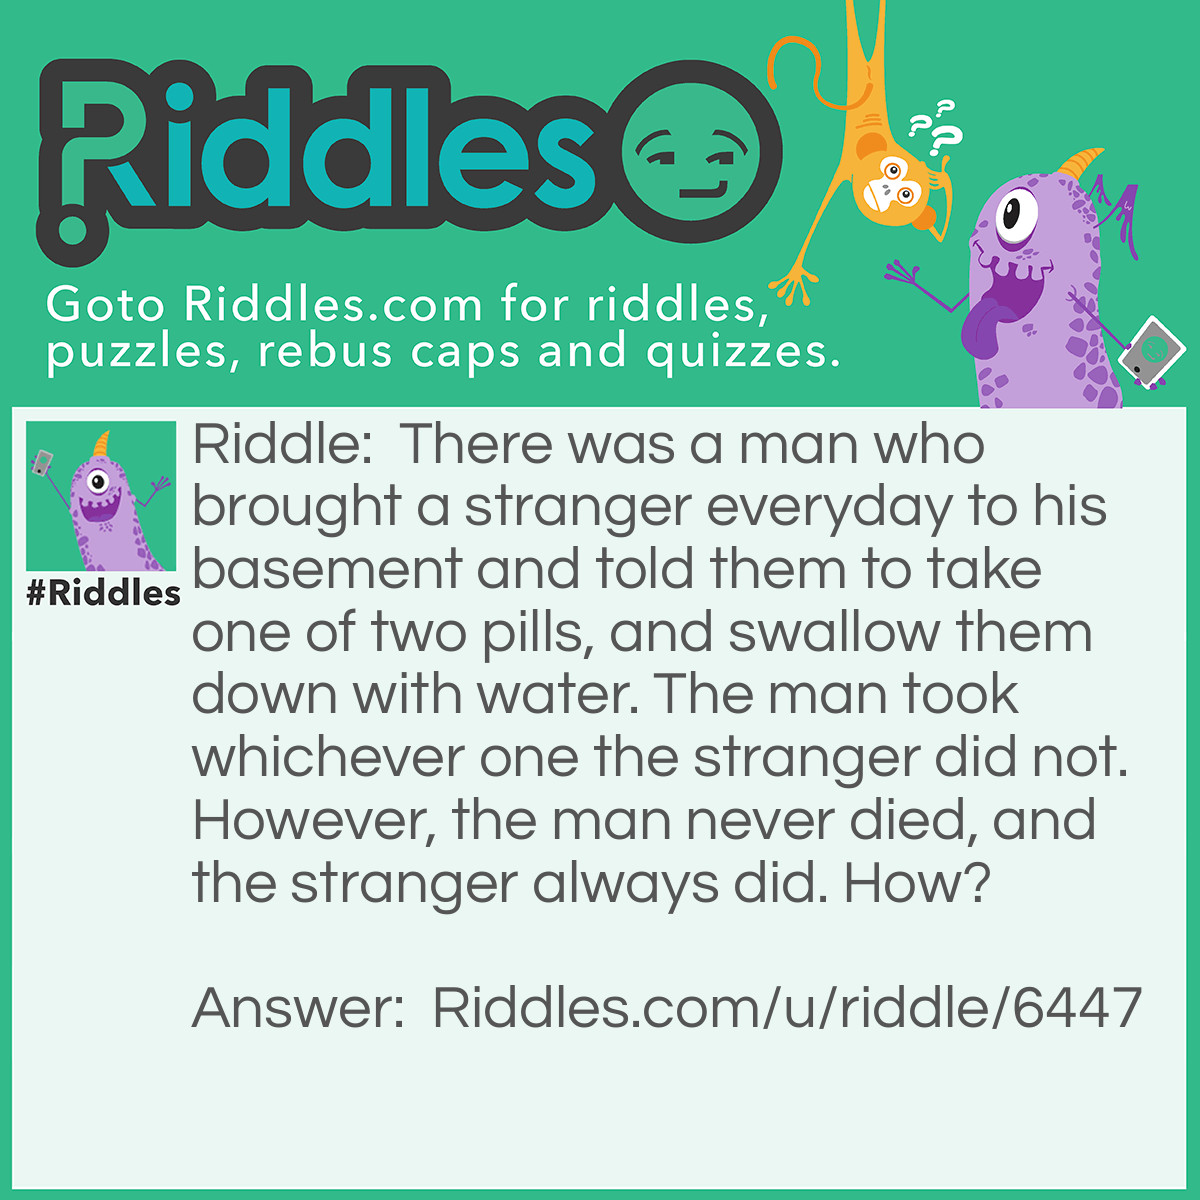 Riddle: There was a man who brought a stranger everyday to his basement and told them to take one of two pills, and swallow them down with water. The man took whichever one the stranger did not. However, the man never died, and the stranger always did. How? Answer: The poison was in the water.